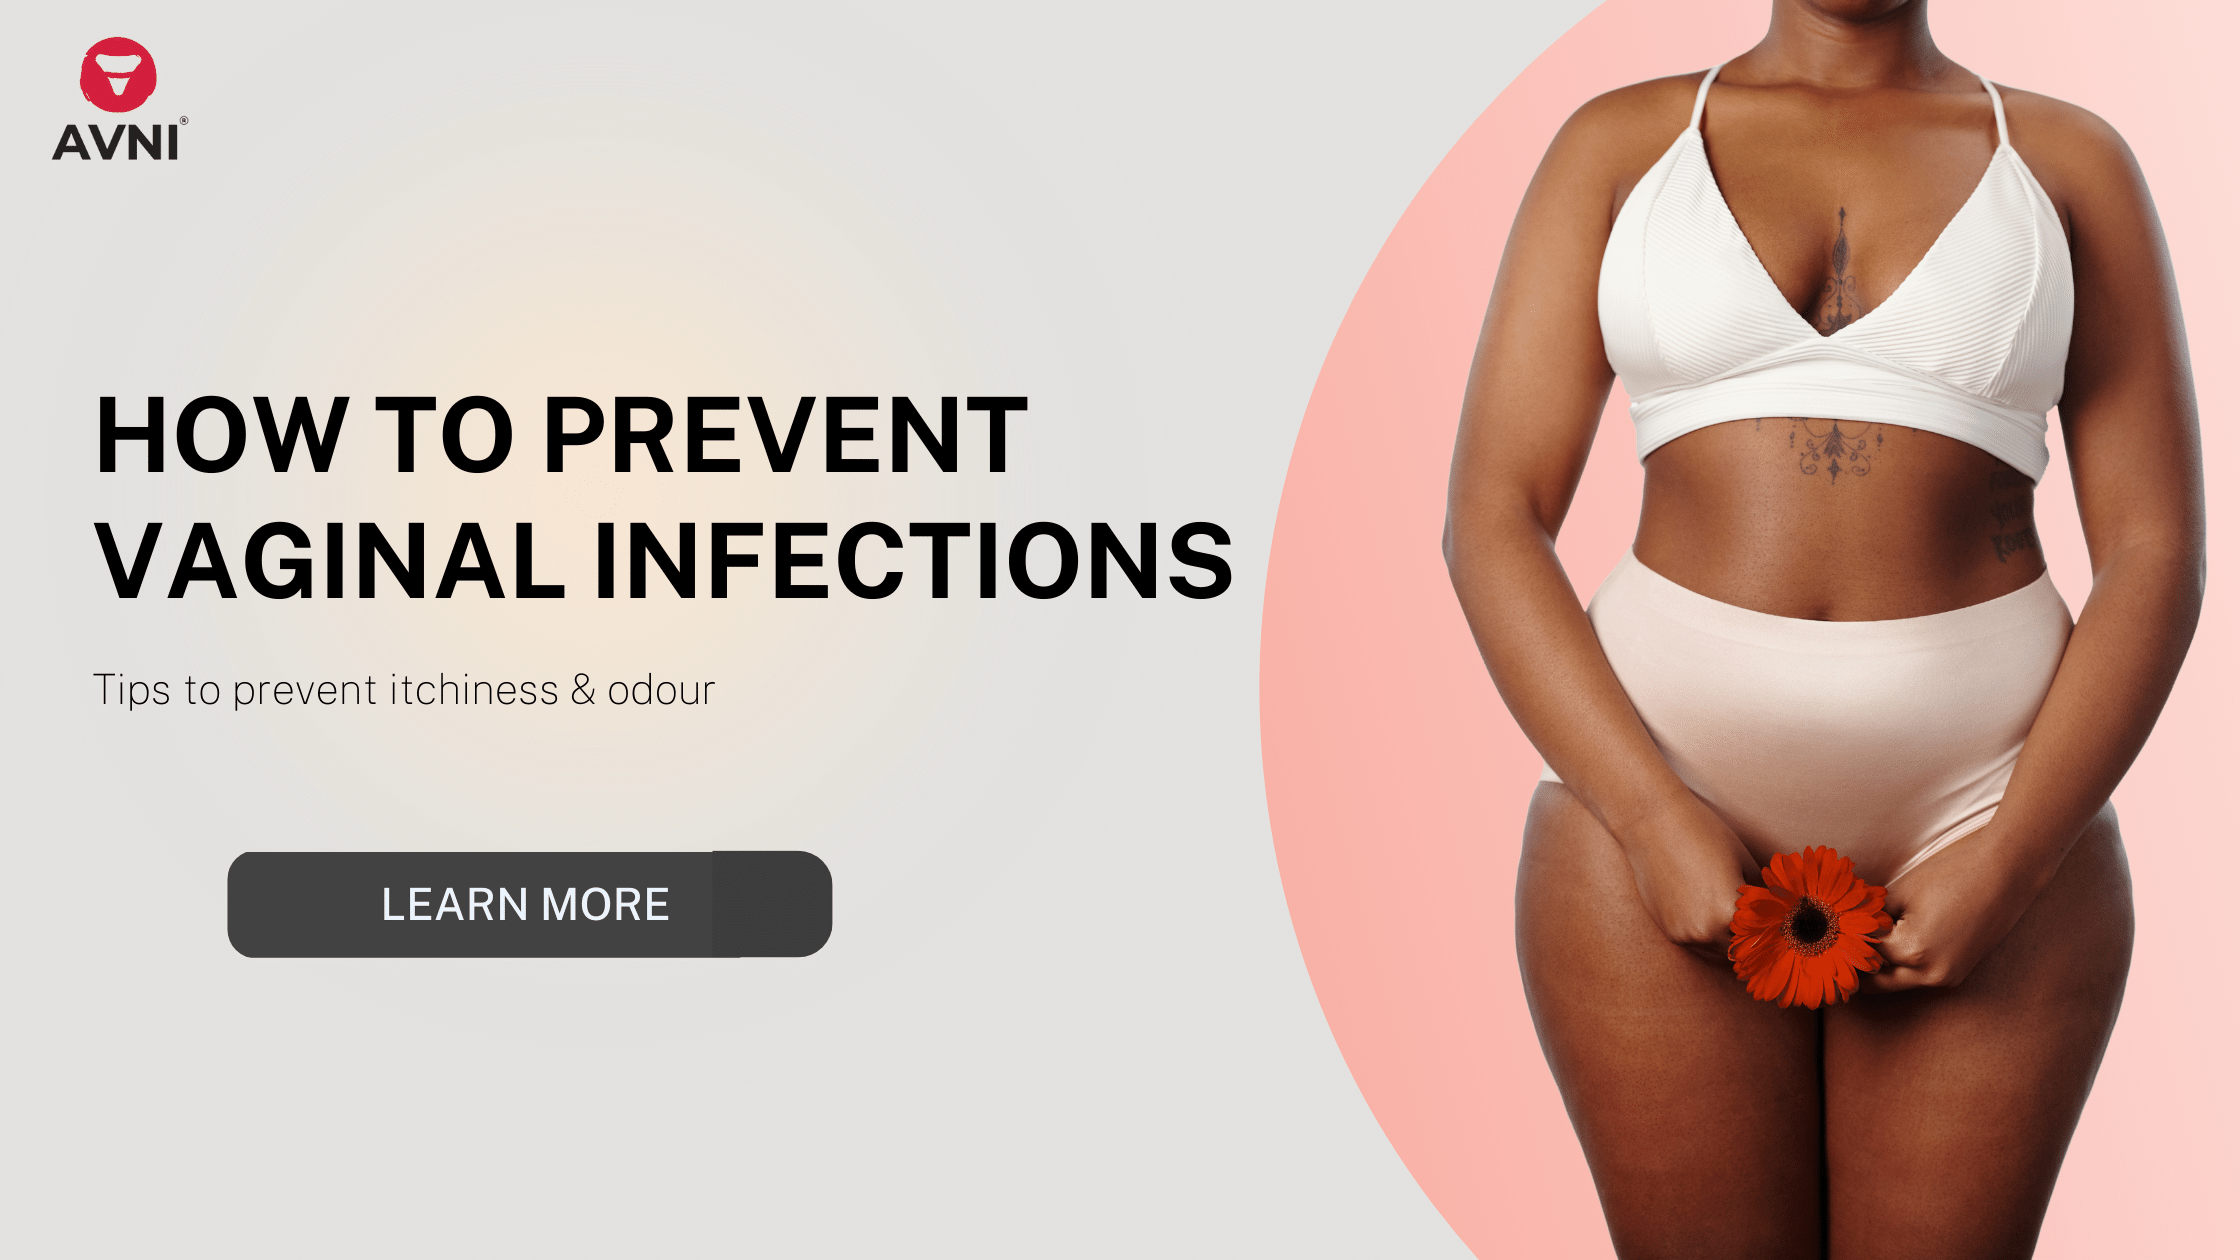 Vaginal Infection Types and Prevention Tips image